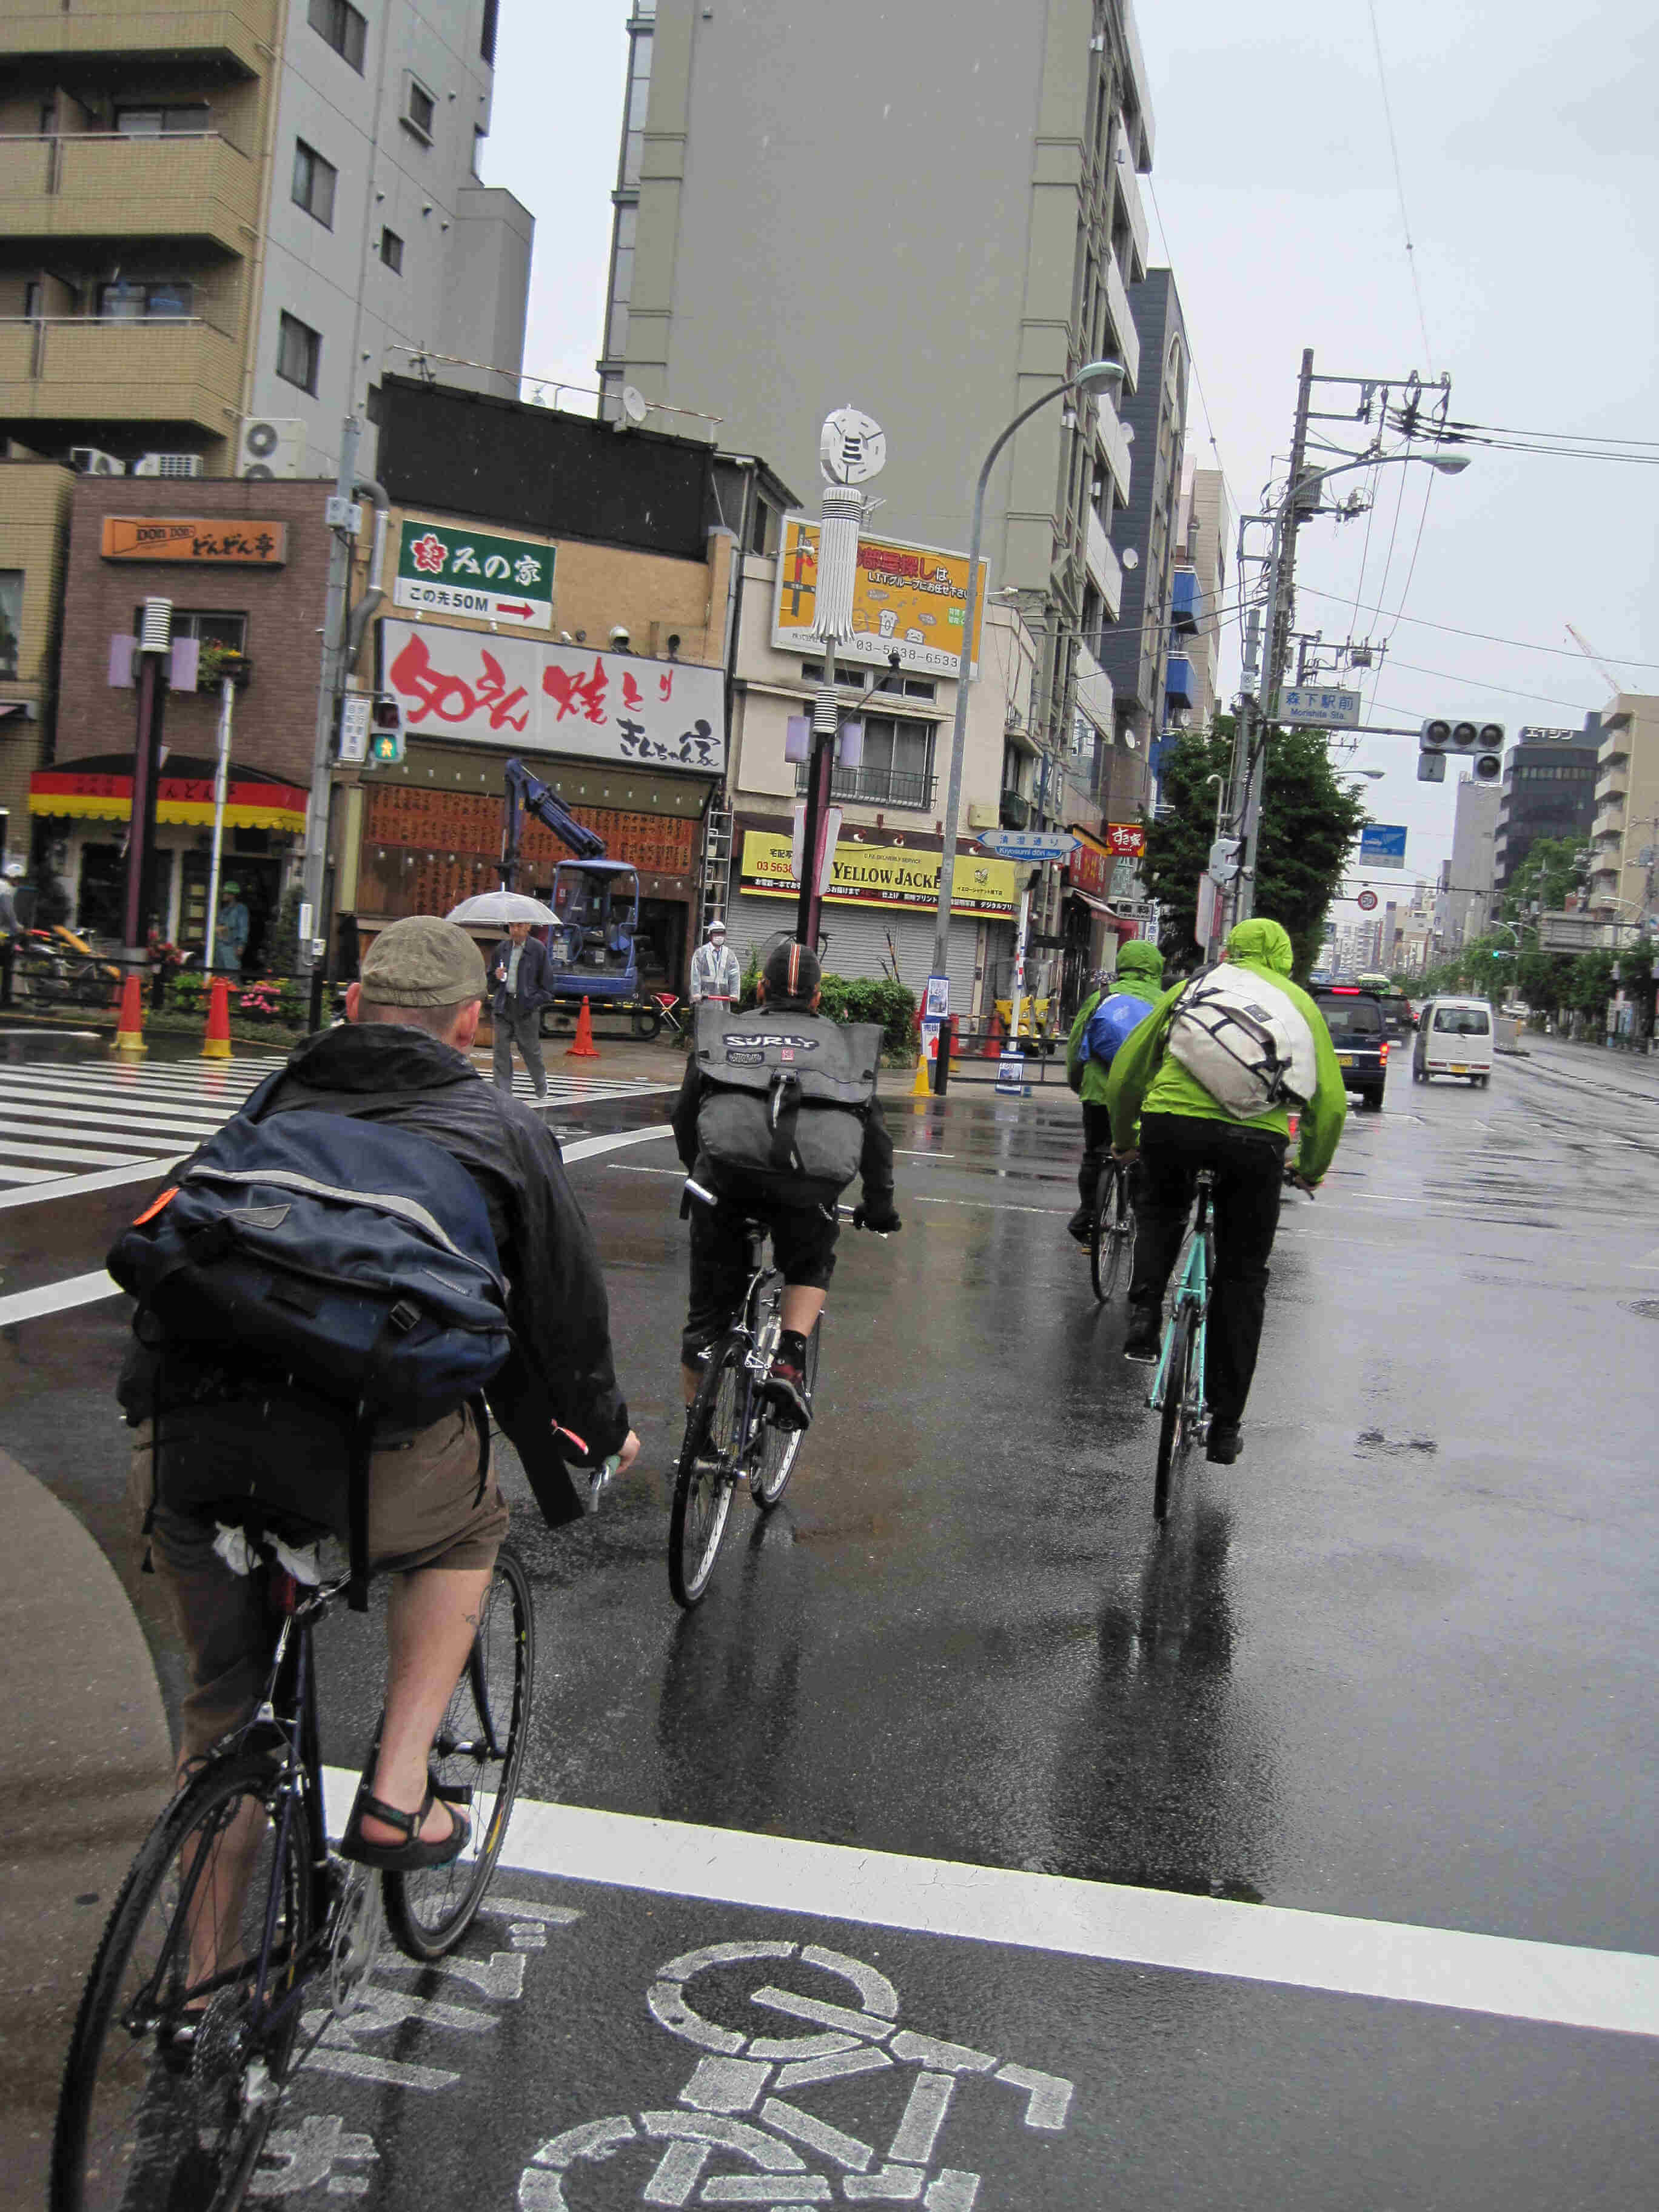 Rear view of 4 cyclists, riding their Surly bikes across a wet city street, with building on both sides